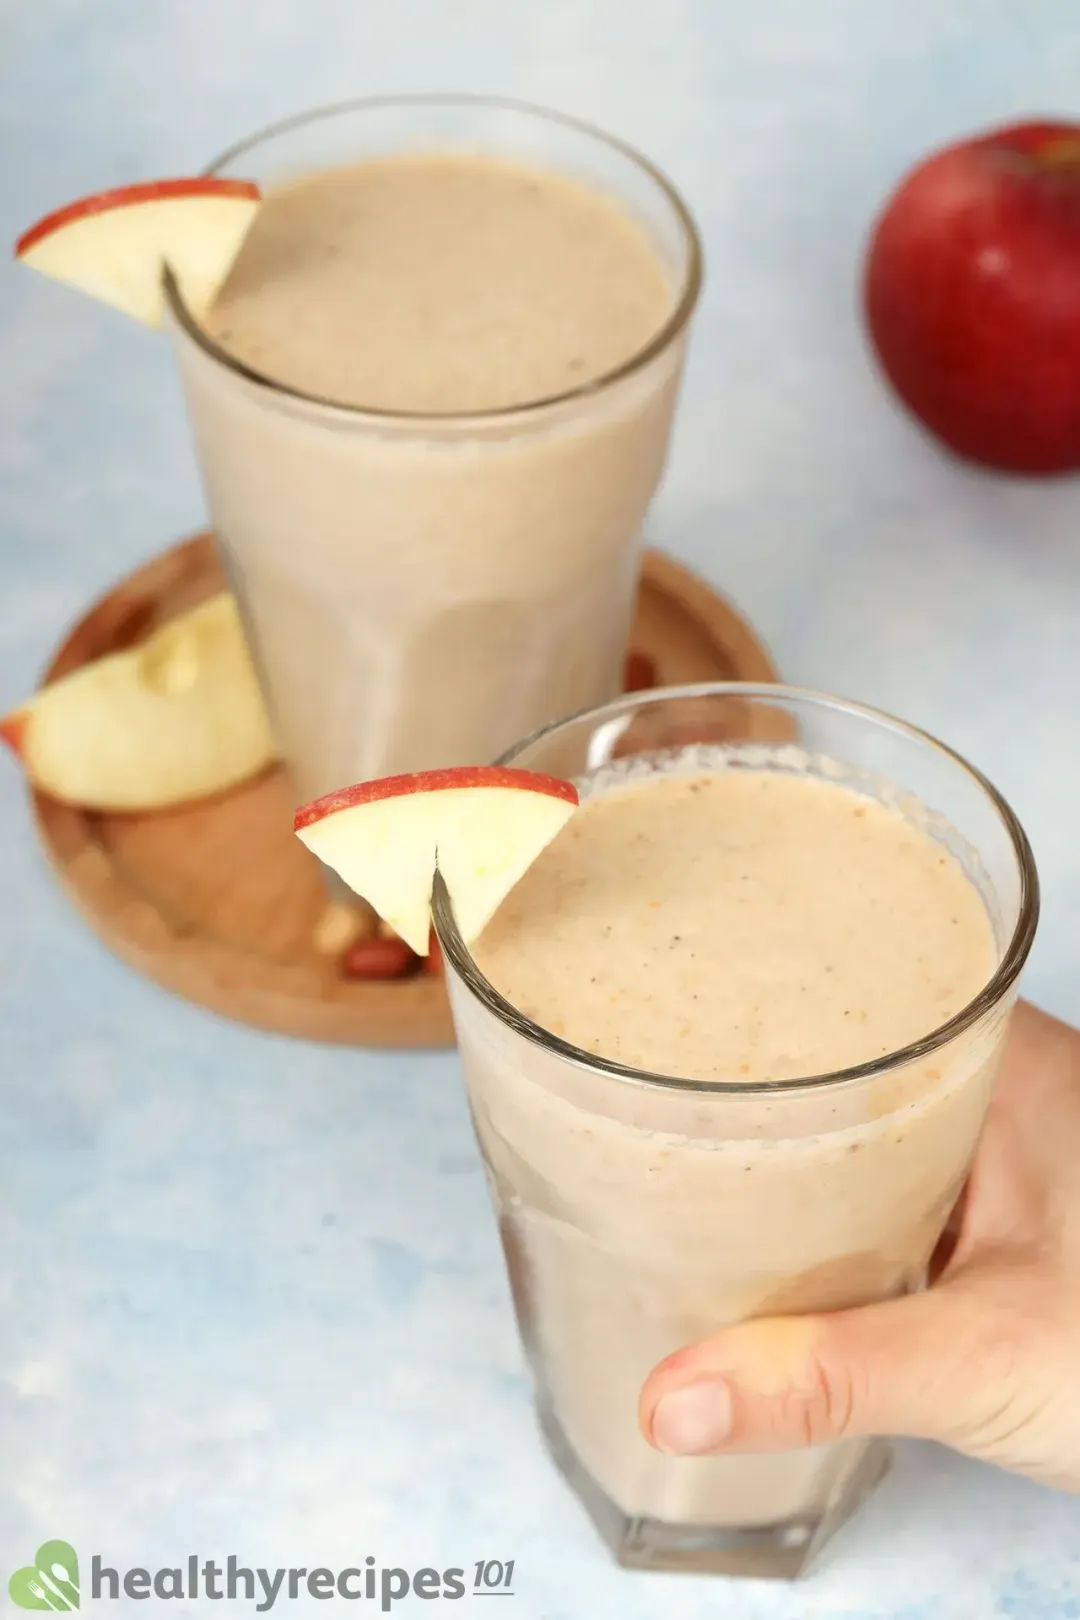 Storing and Freezing Apple Peanut Butter Smoothie